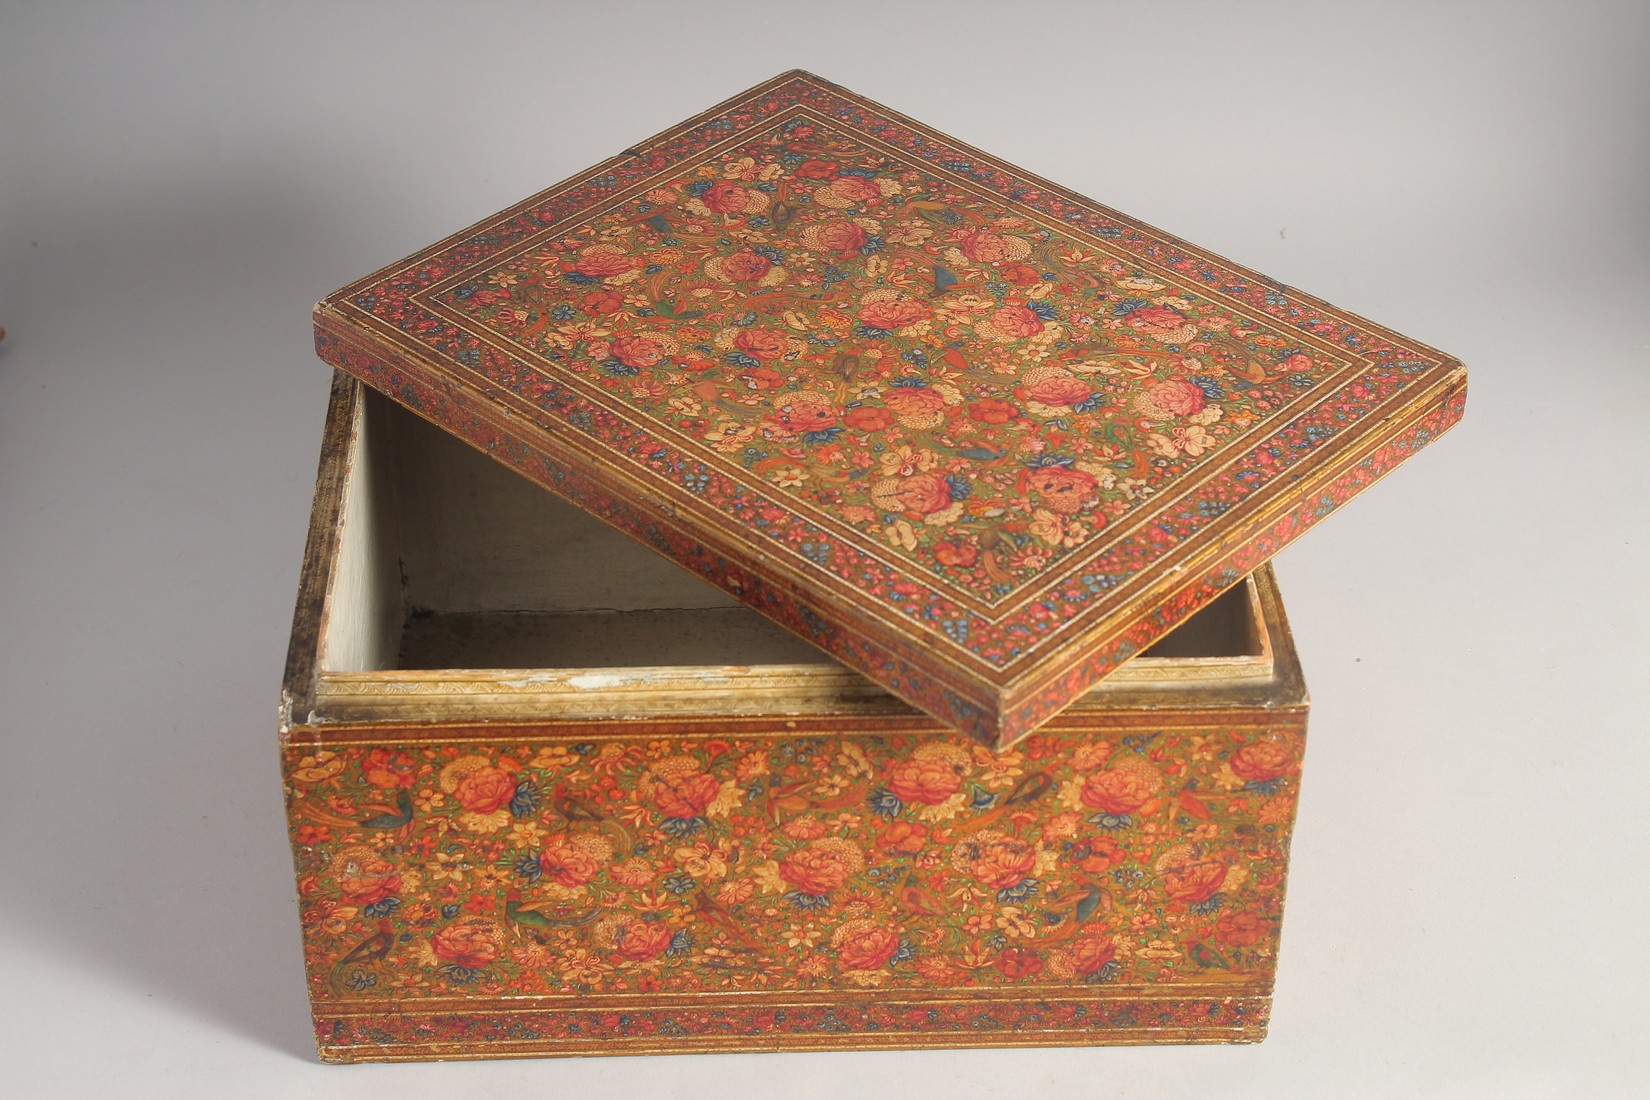 A VERY FINE MID-19TH CENTURY ANGLO-INDIAN KASHMIRI PAINTED, GILDED, AND LACQUERED BOX, depicting - Image 4 of 5